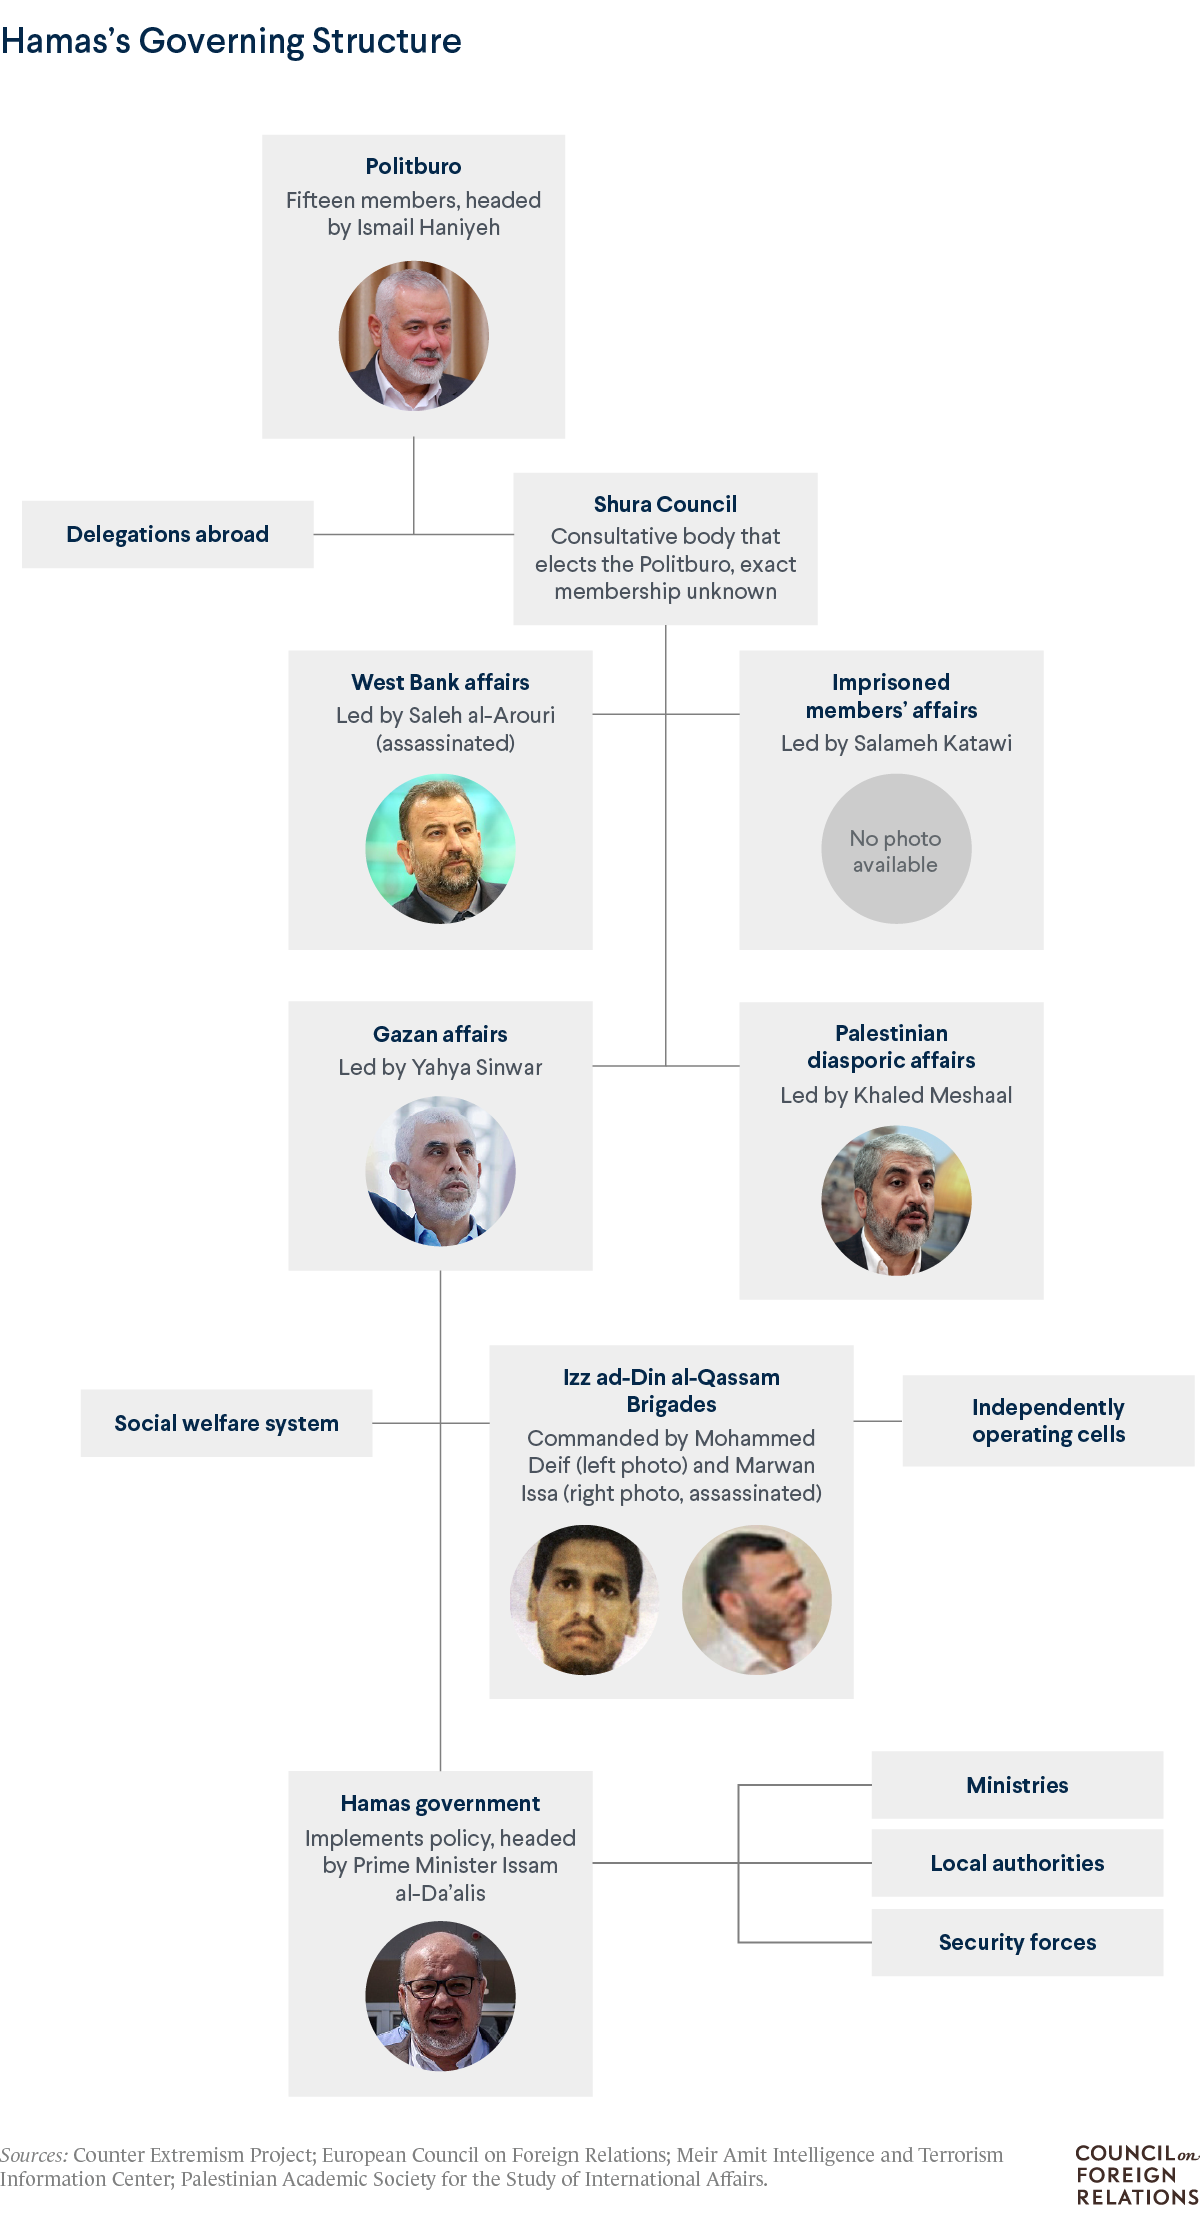 A graphic showing the governing structure of Hamas, with the Politburo at the top